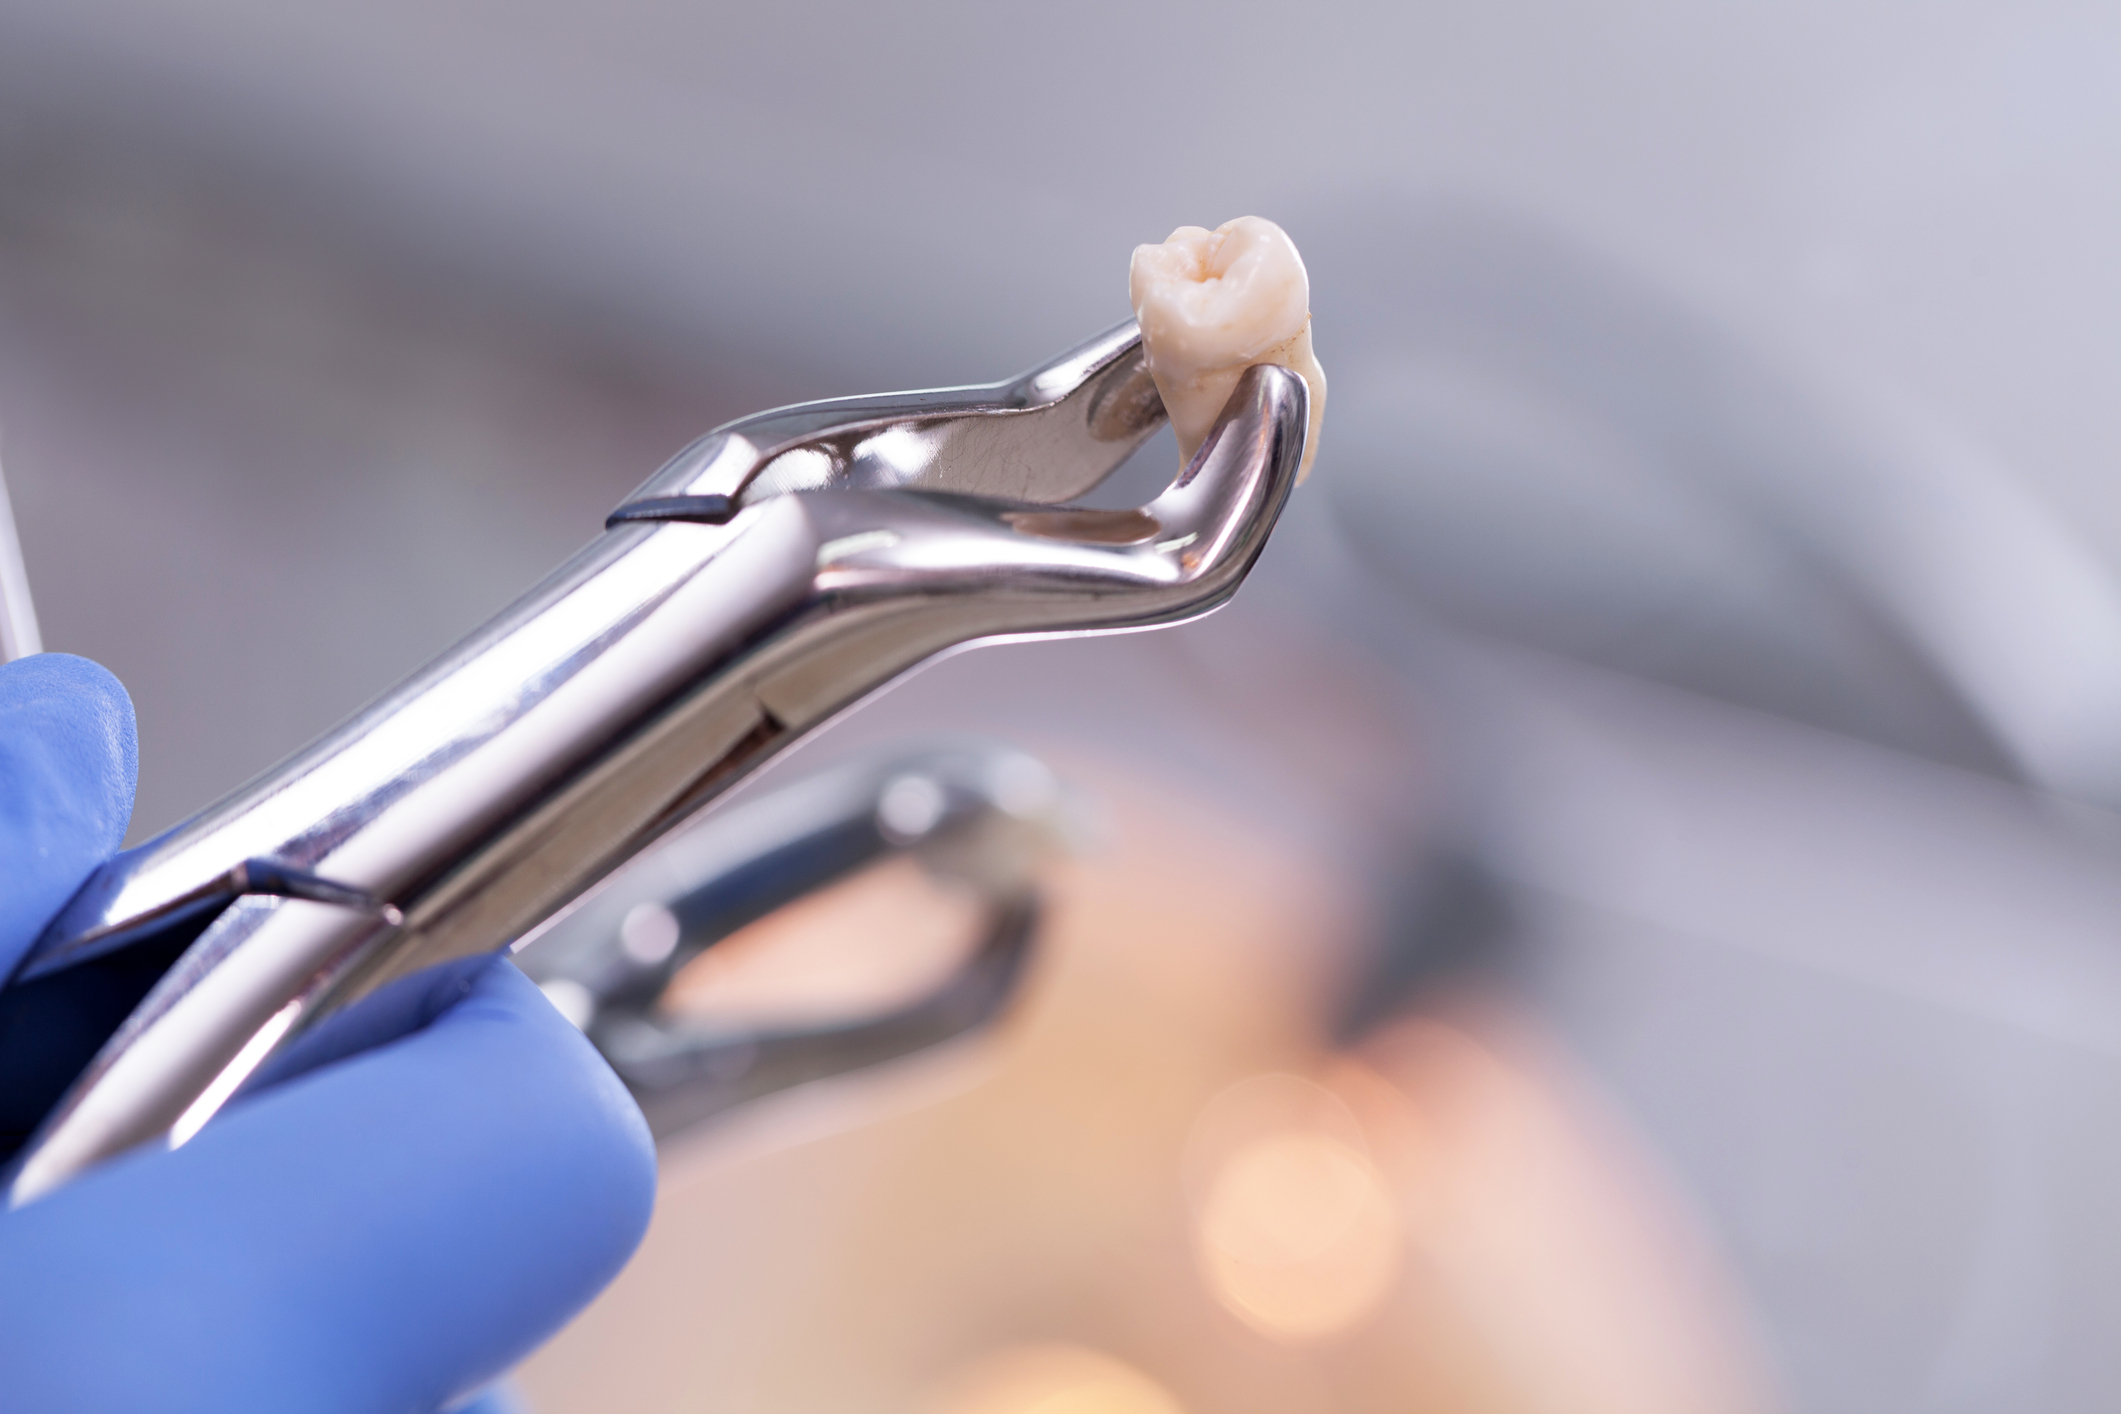 dental forceps holding a wisdom tooth that was removed